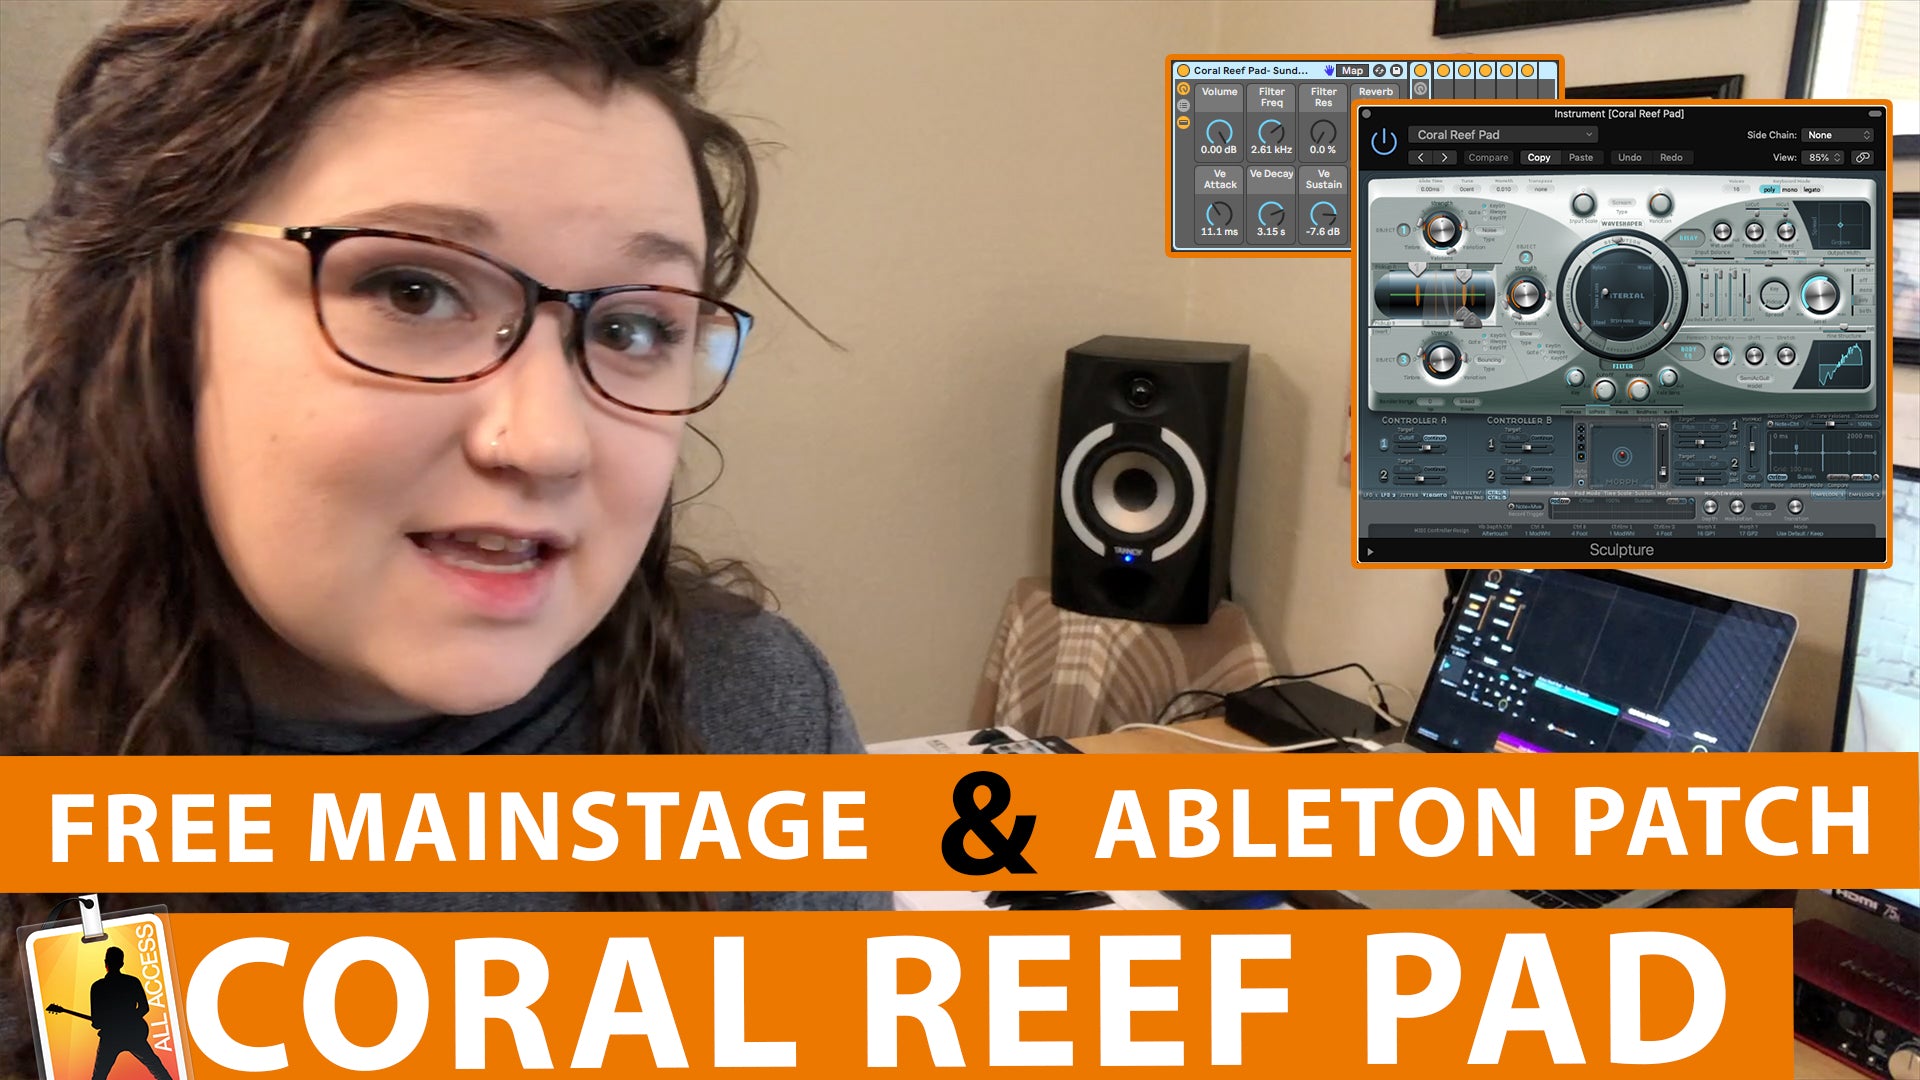 Free MainStage & Ableton Worship Patch! - Coral Reef Pad